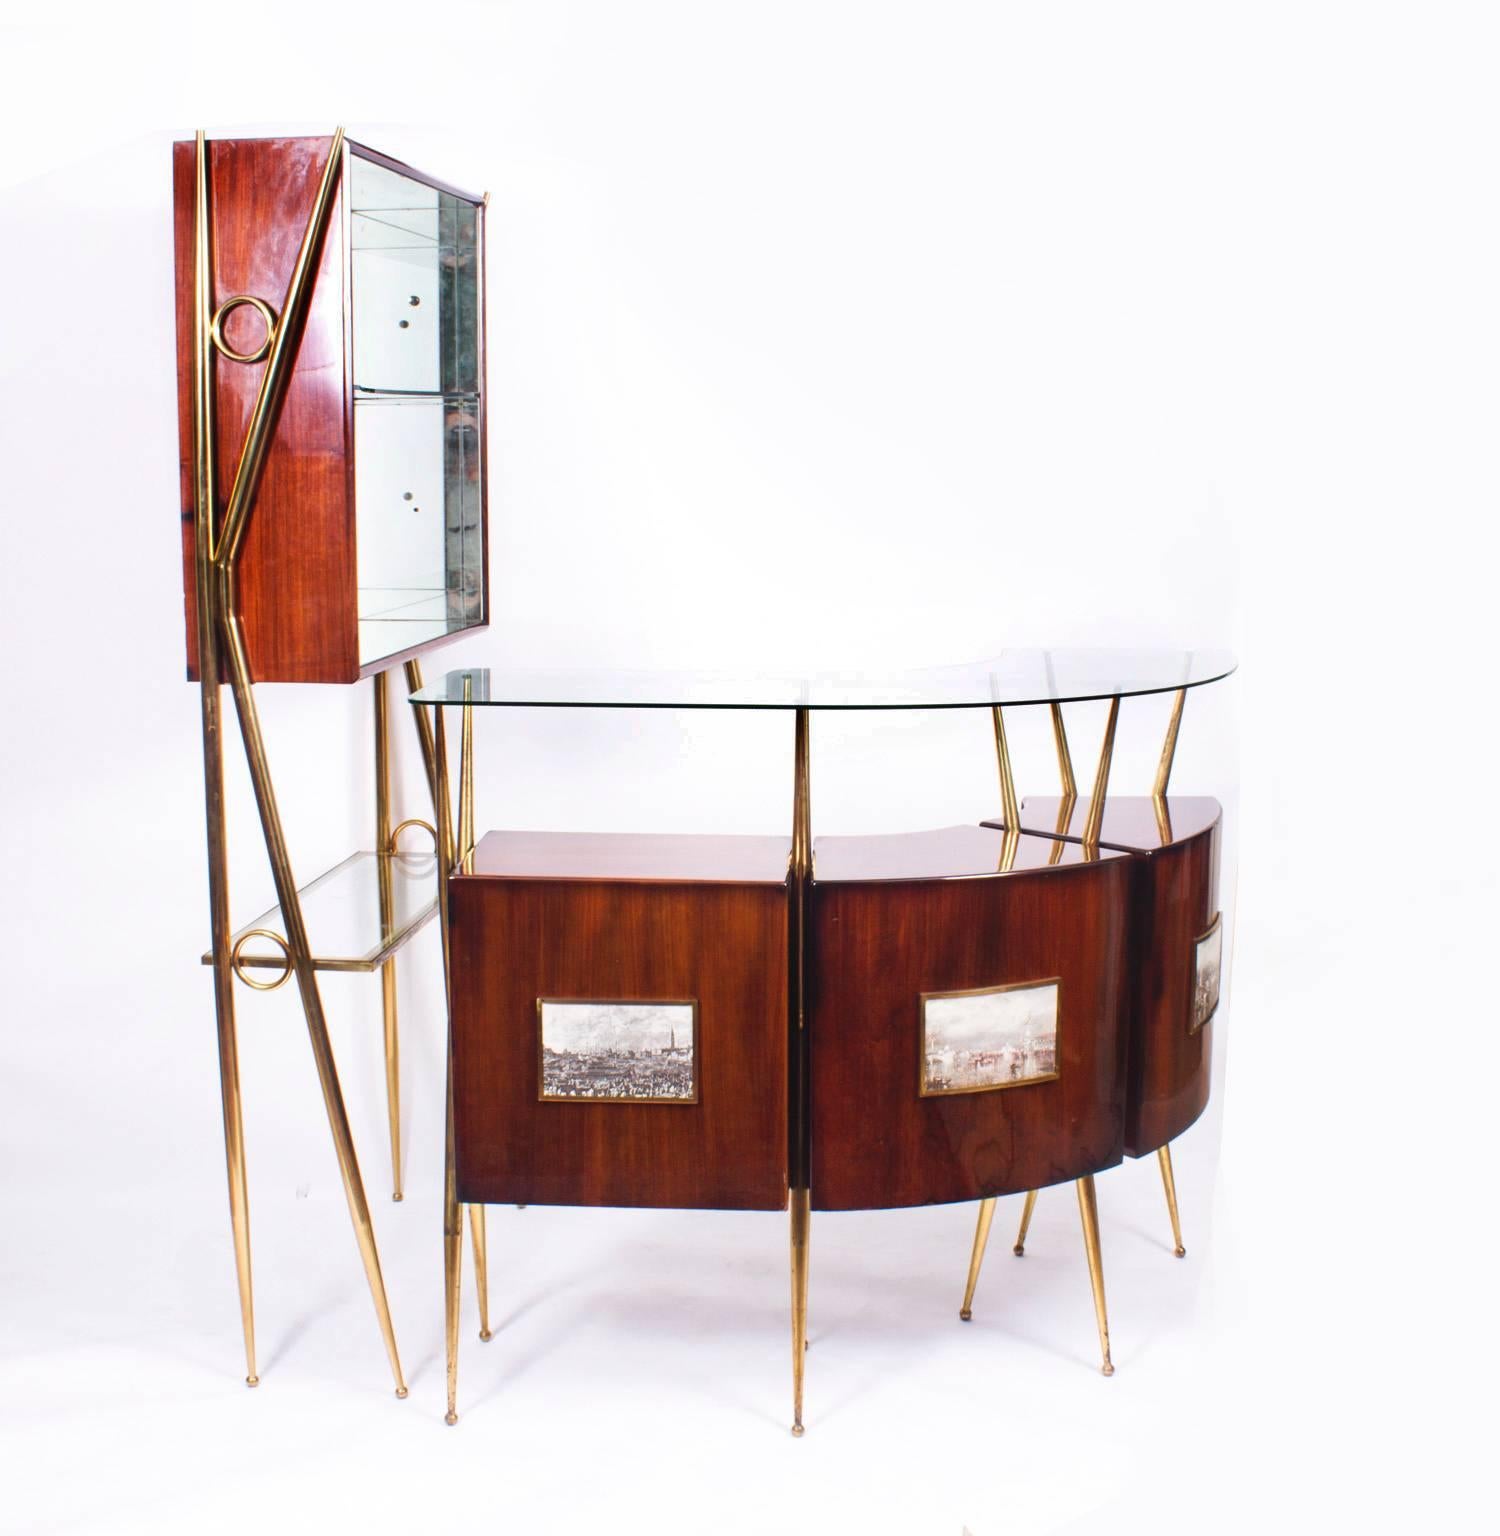 This is a fabulous modernist cocktail bar with mirrored display vitrine, circa 1950 in date and in the manner of the renowned Italian designer Gio Ponti.

We purchased this from a beautiful house in central London and the owners, who were